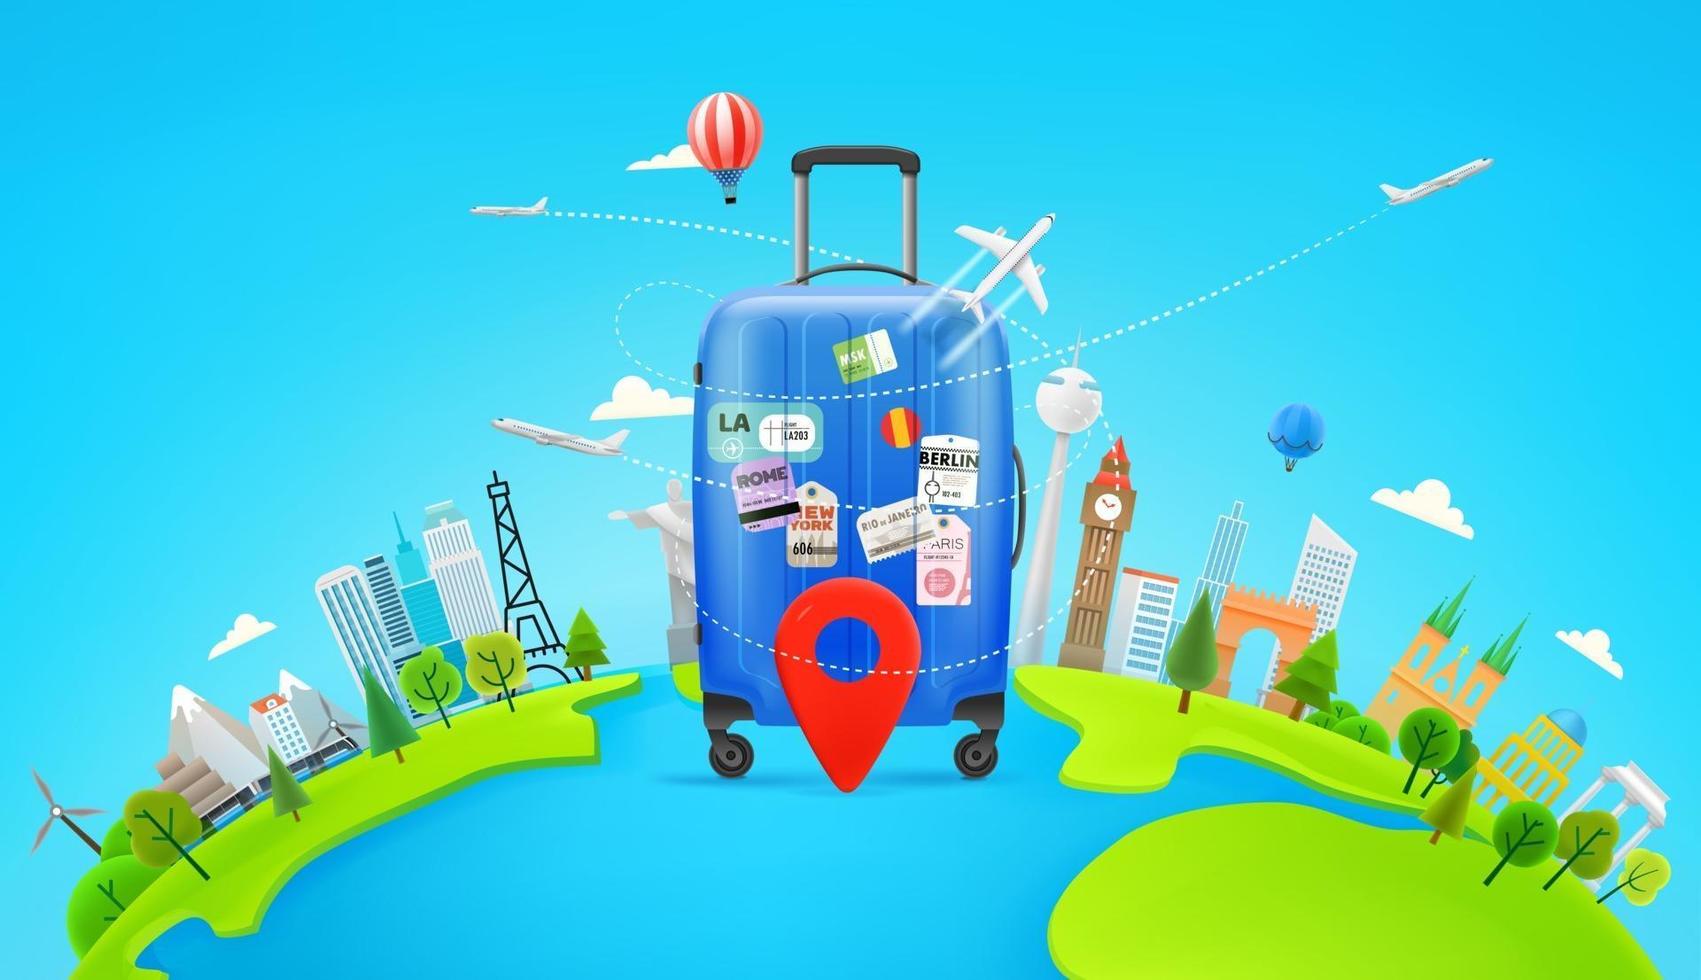 Travel concept with blue handbag and world panorama vector